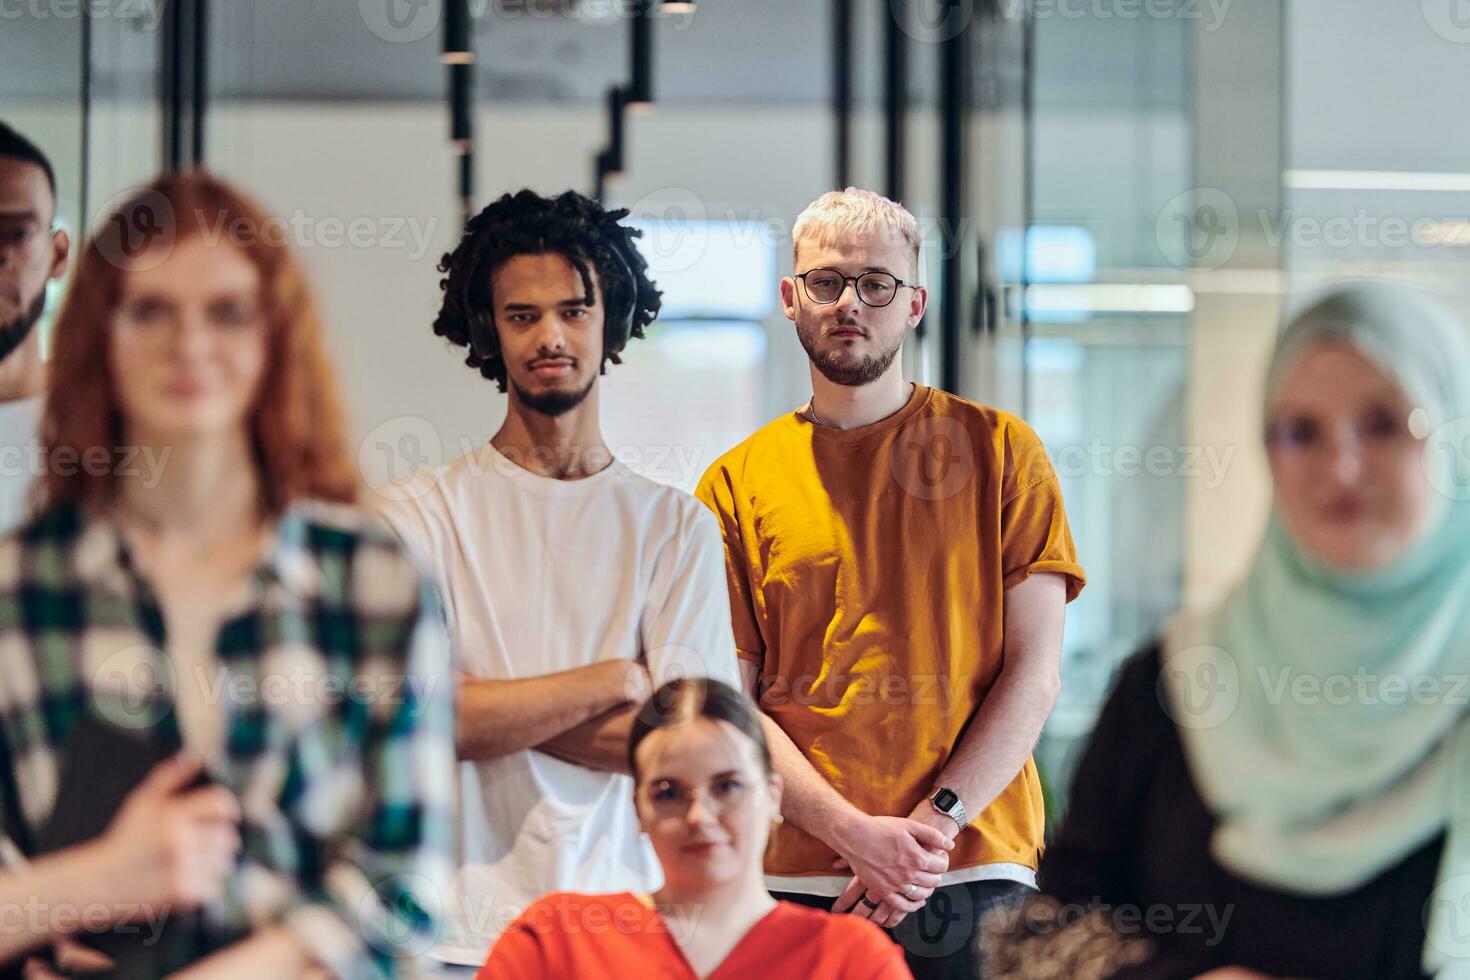 A diverse group of young business people congregates within a modern startup's glass-enclosed office, featuring inclusivity with a person in a wheelchair, an African American young man , and a hijab-clad woman, showcasing a dynamic blend of innovation and photo